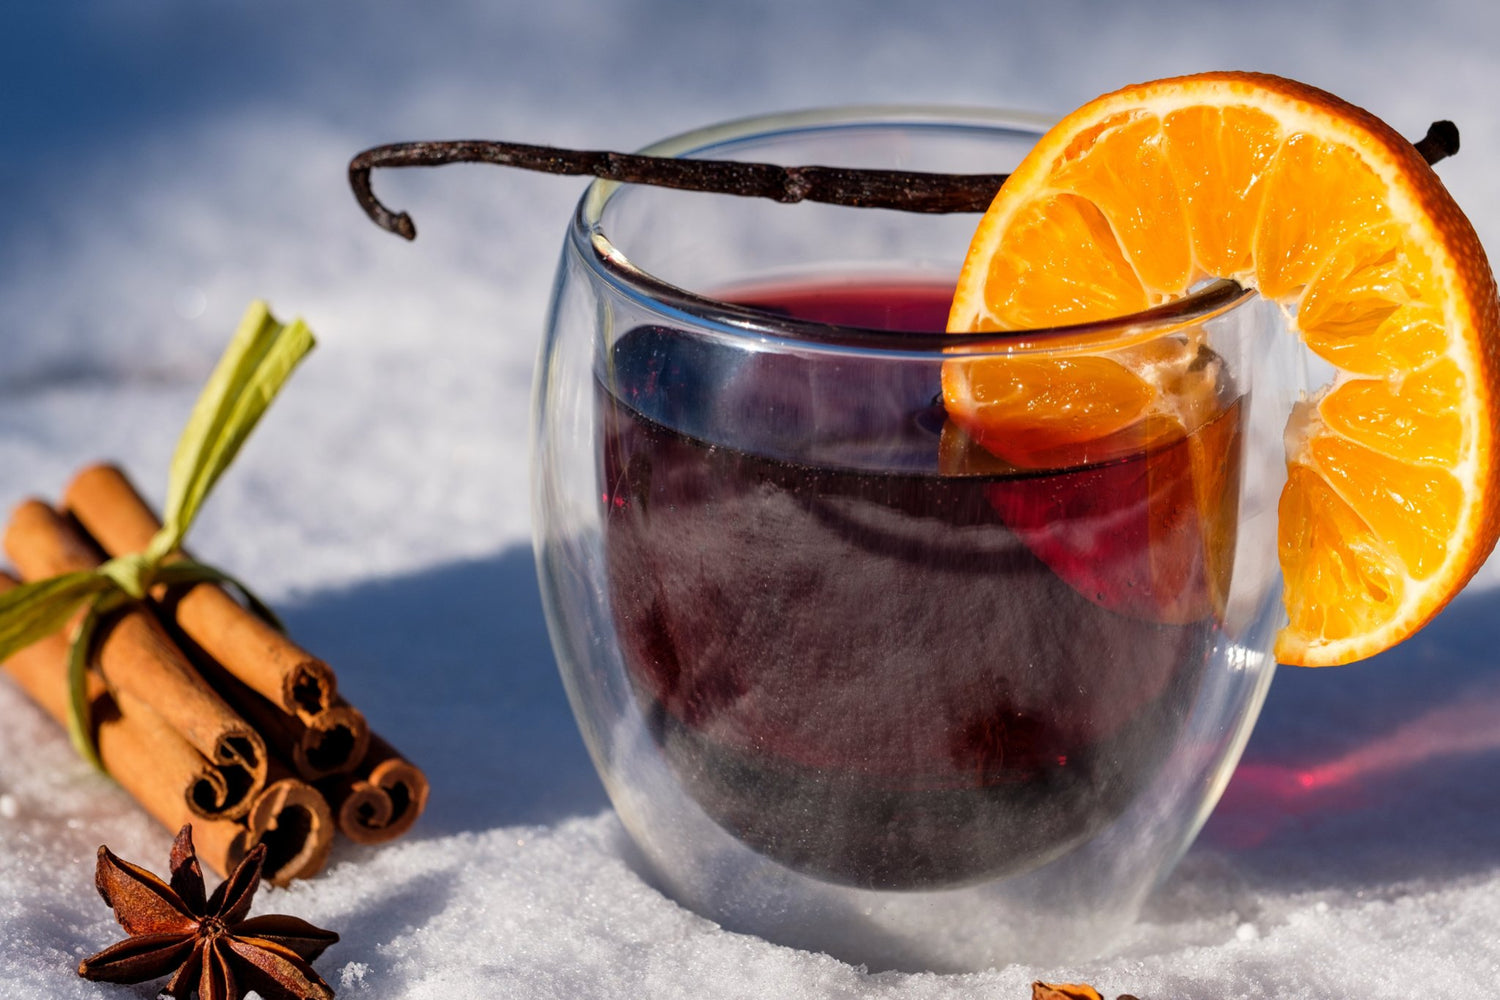 Boost Your Immunity This Season With This Hot Mulled Elderberry Punch Recipe - Loose Leaf Tea Market